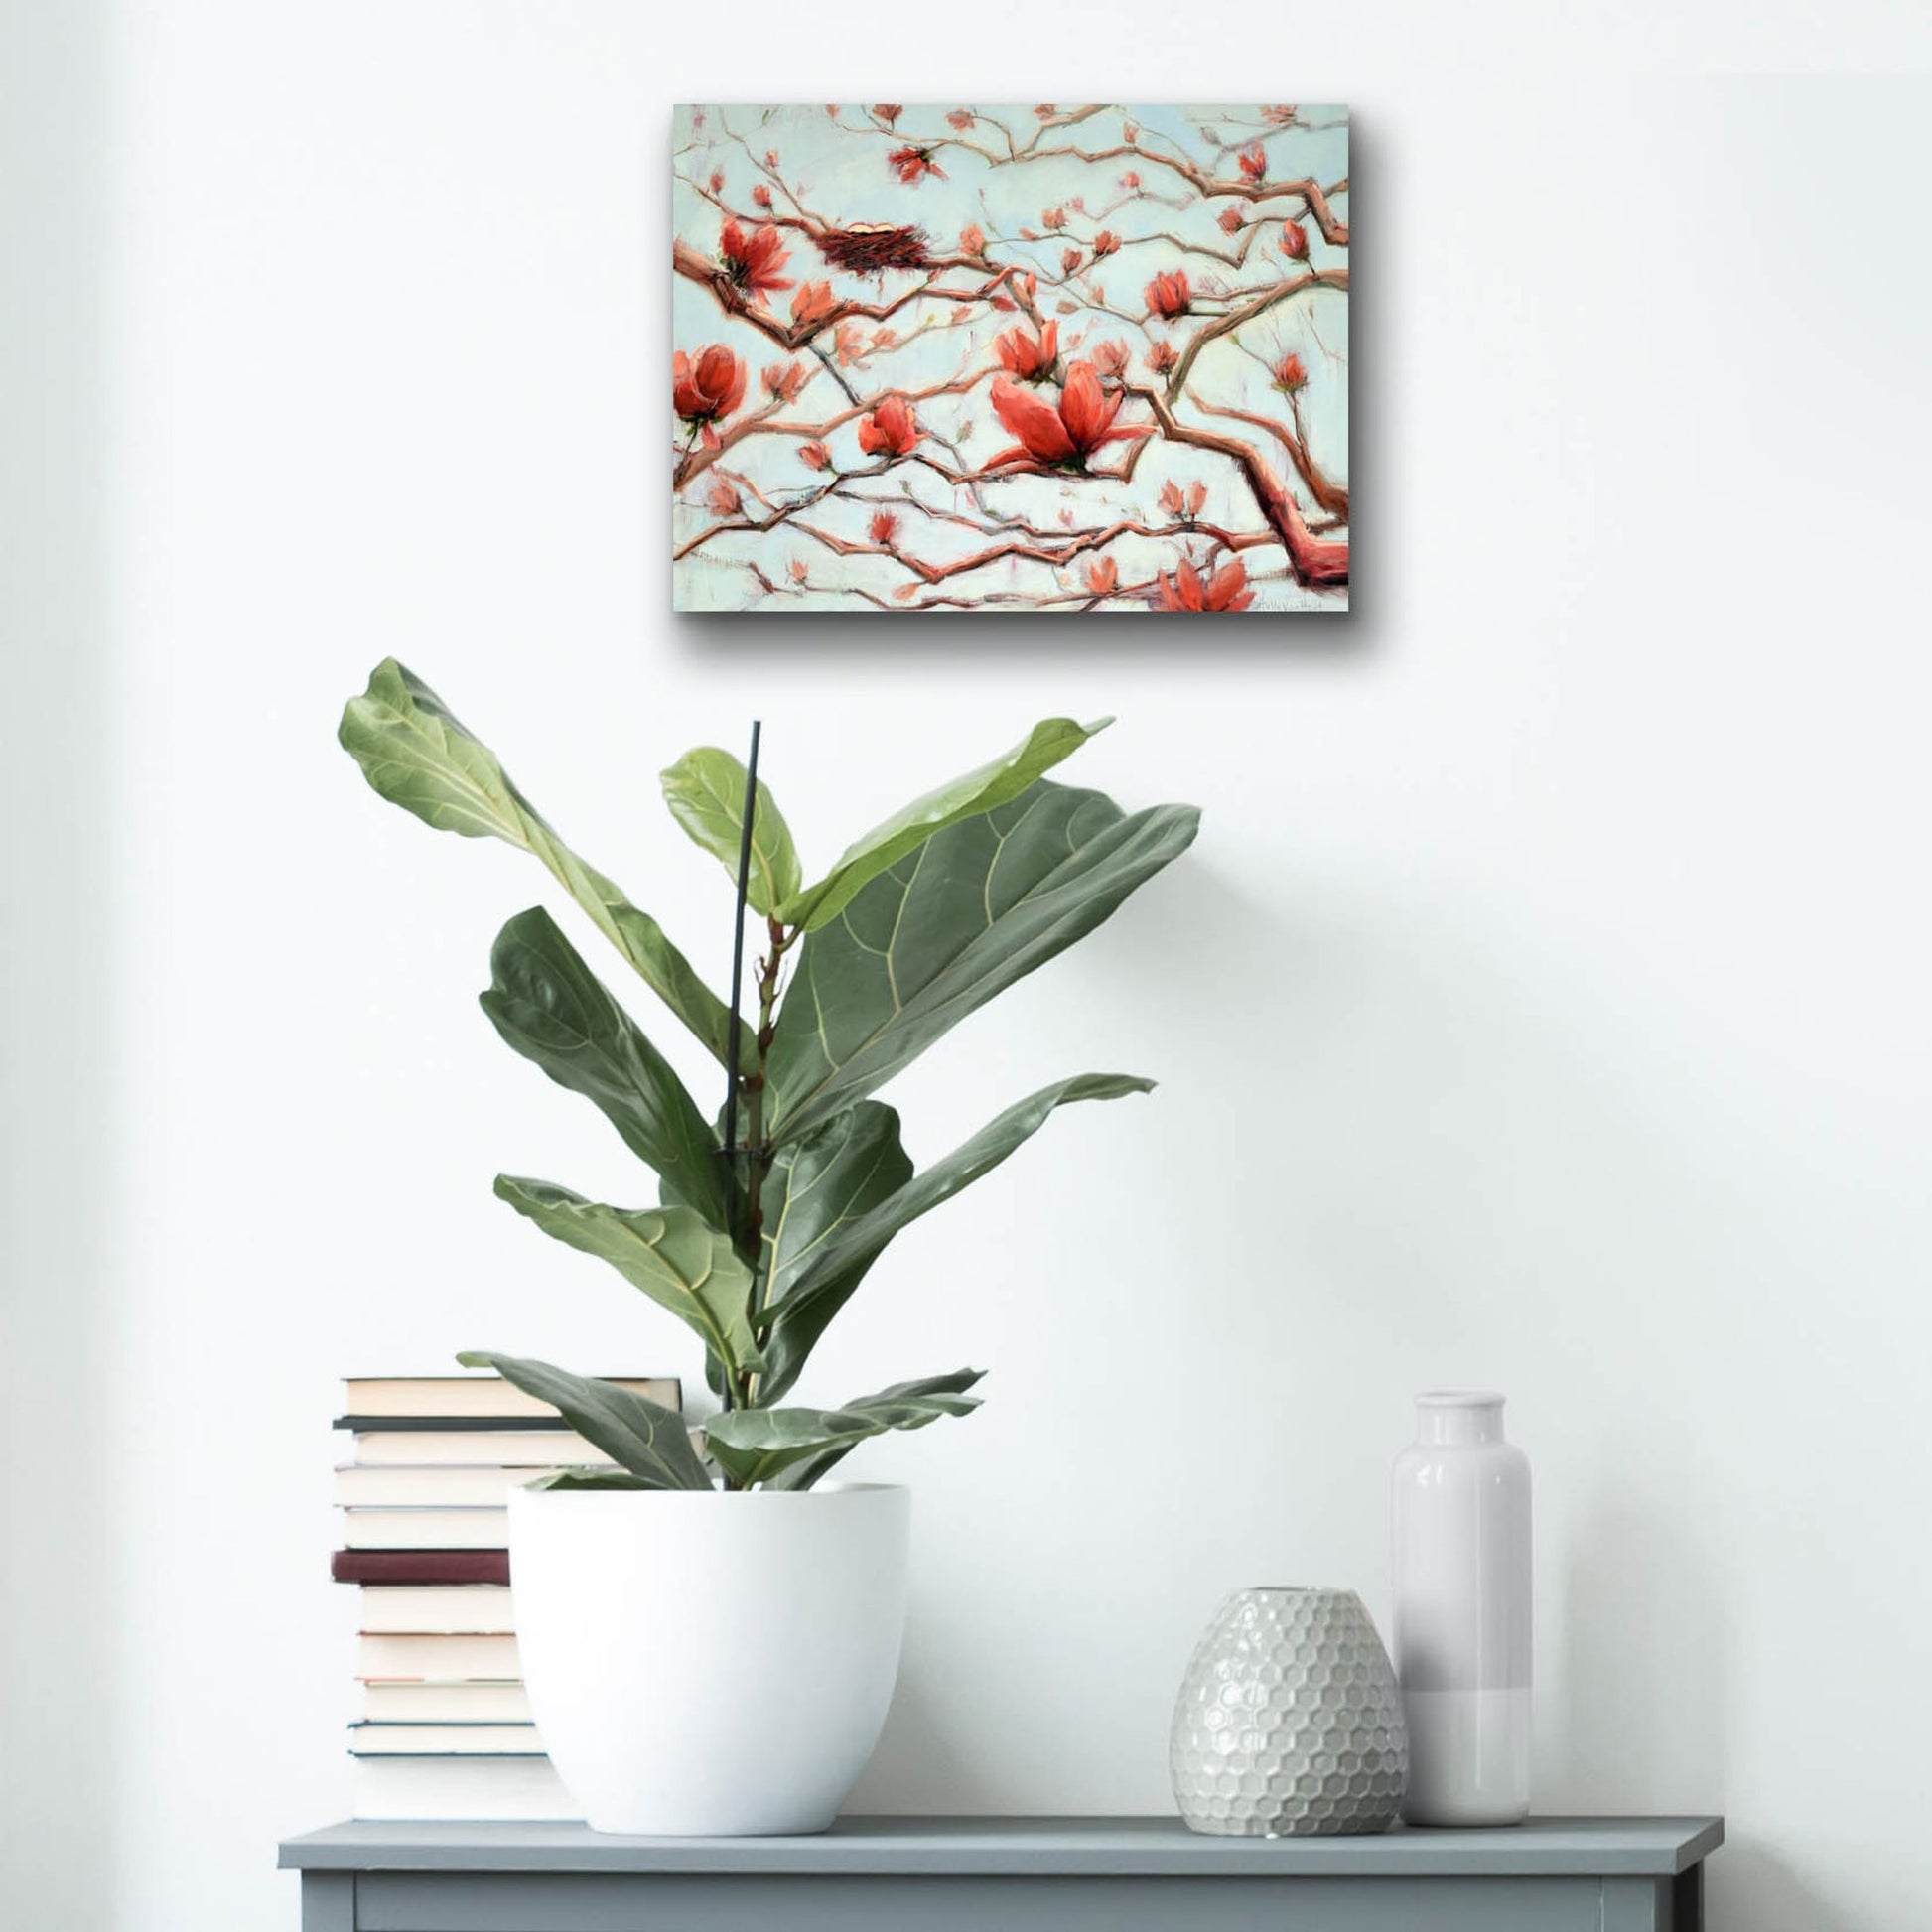 Epic Art 'Possibilities In Full Bloom' by Holly Van Hart, Acrylic Glass Wall Art,16x12